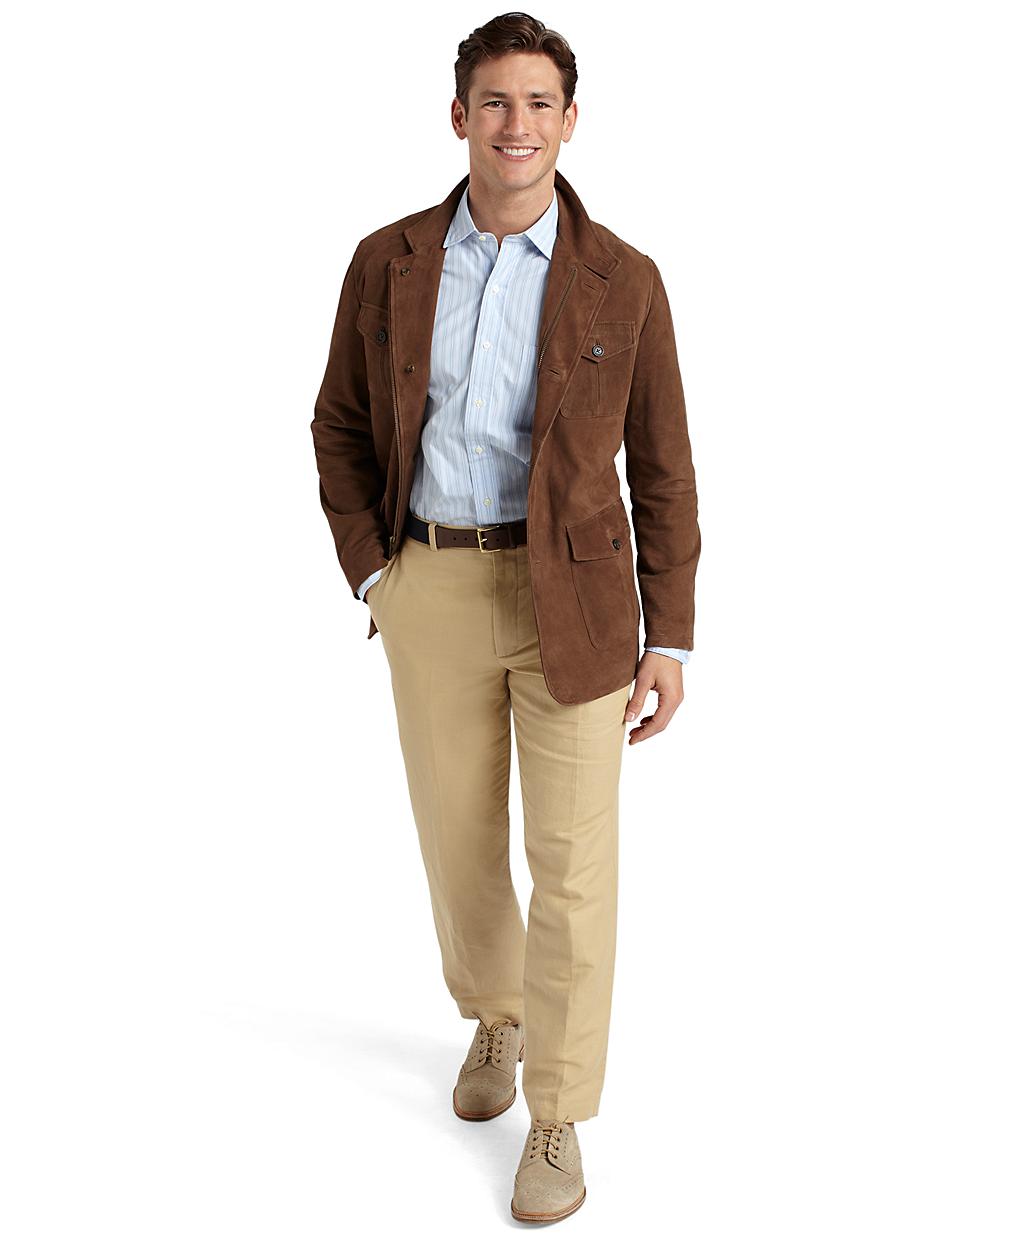 Lyst - Brooks Brothers Suede Hybrid Jacket in Brown for Men